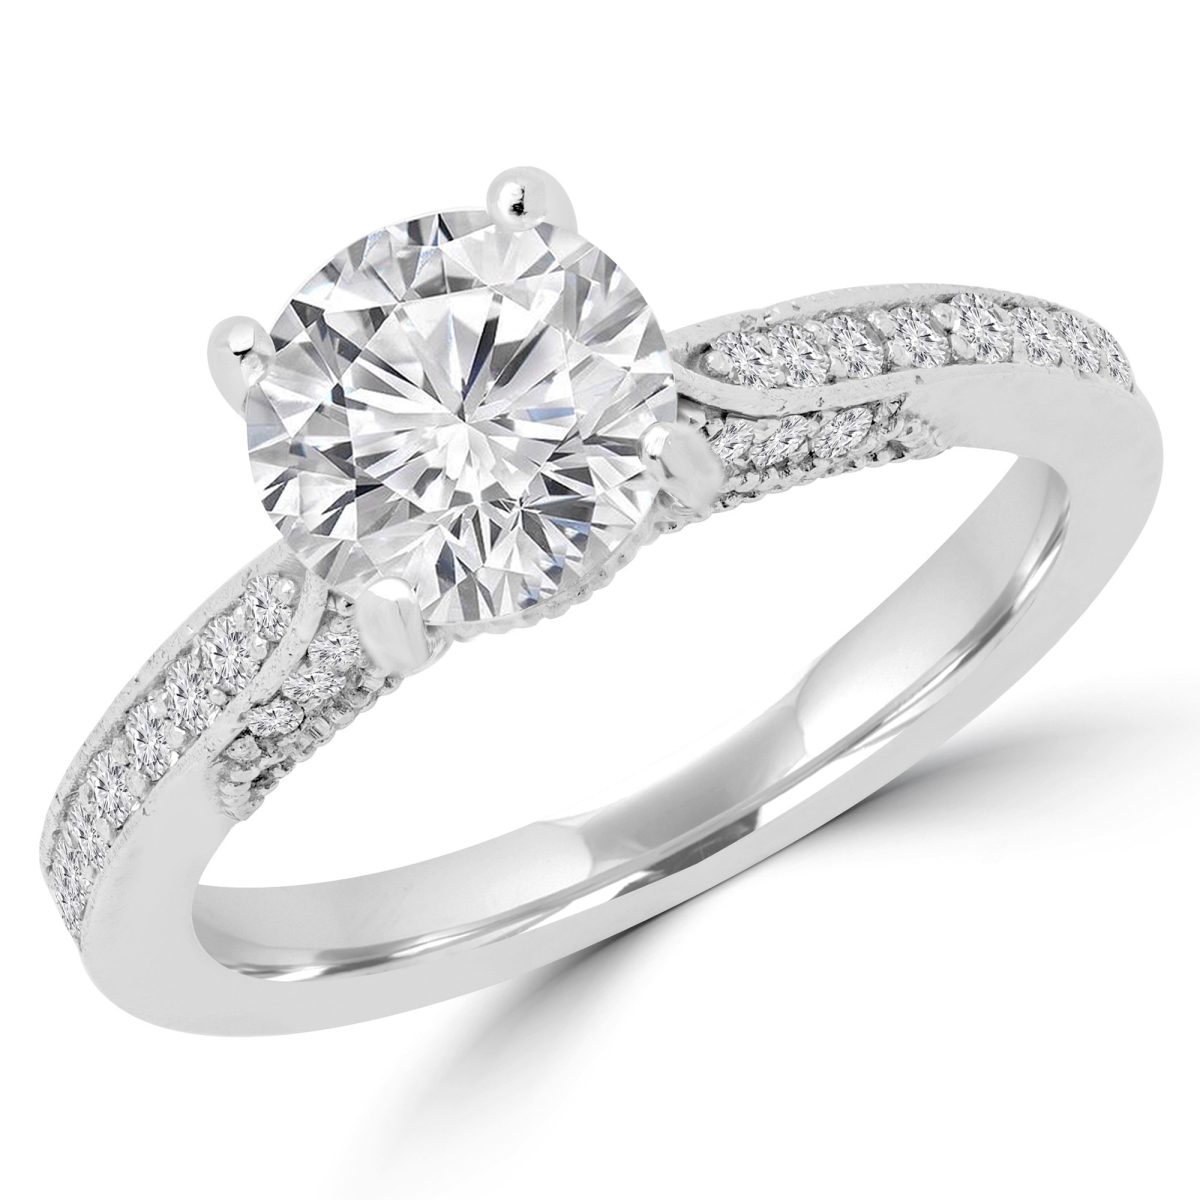 Picture of Majesty Diamonds MD180415-P 1.2 CTW Round Diamond Solitaire with Accents Engagement Ring in 14K White Gold